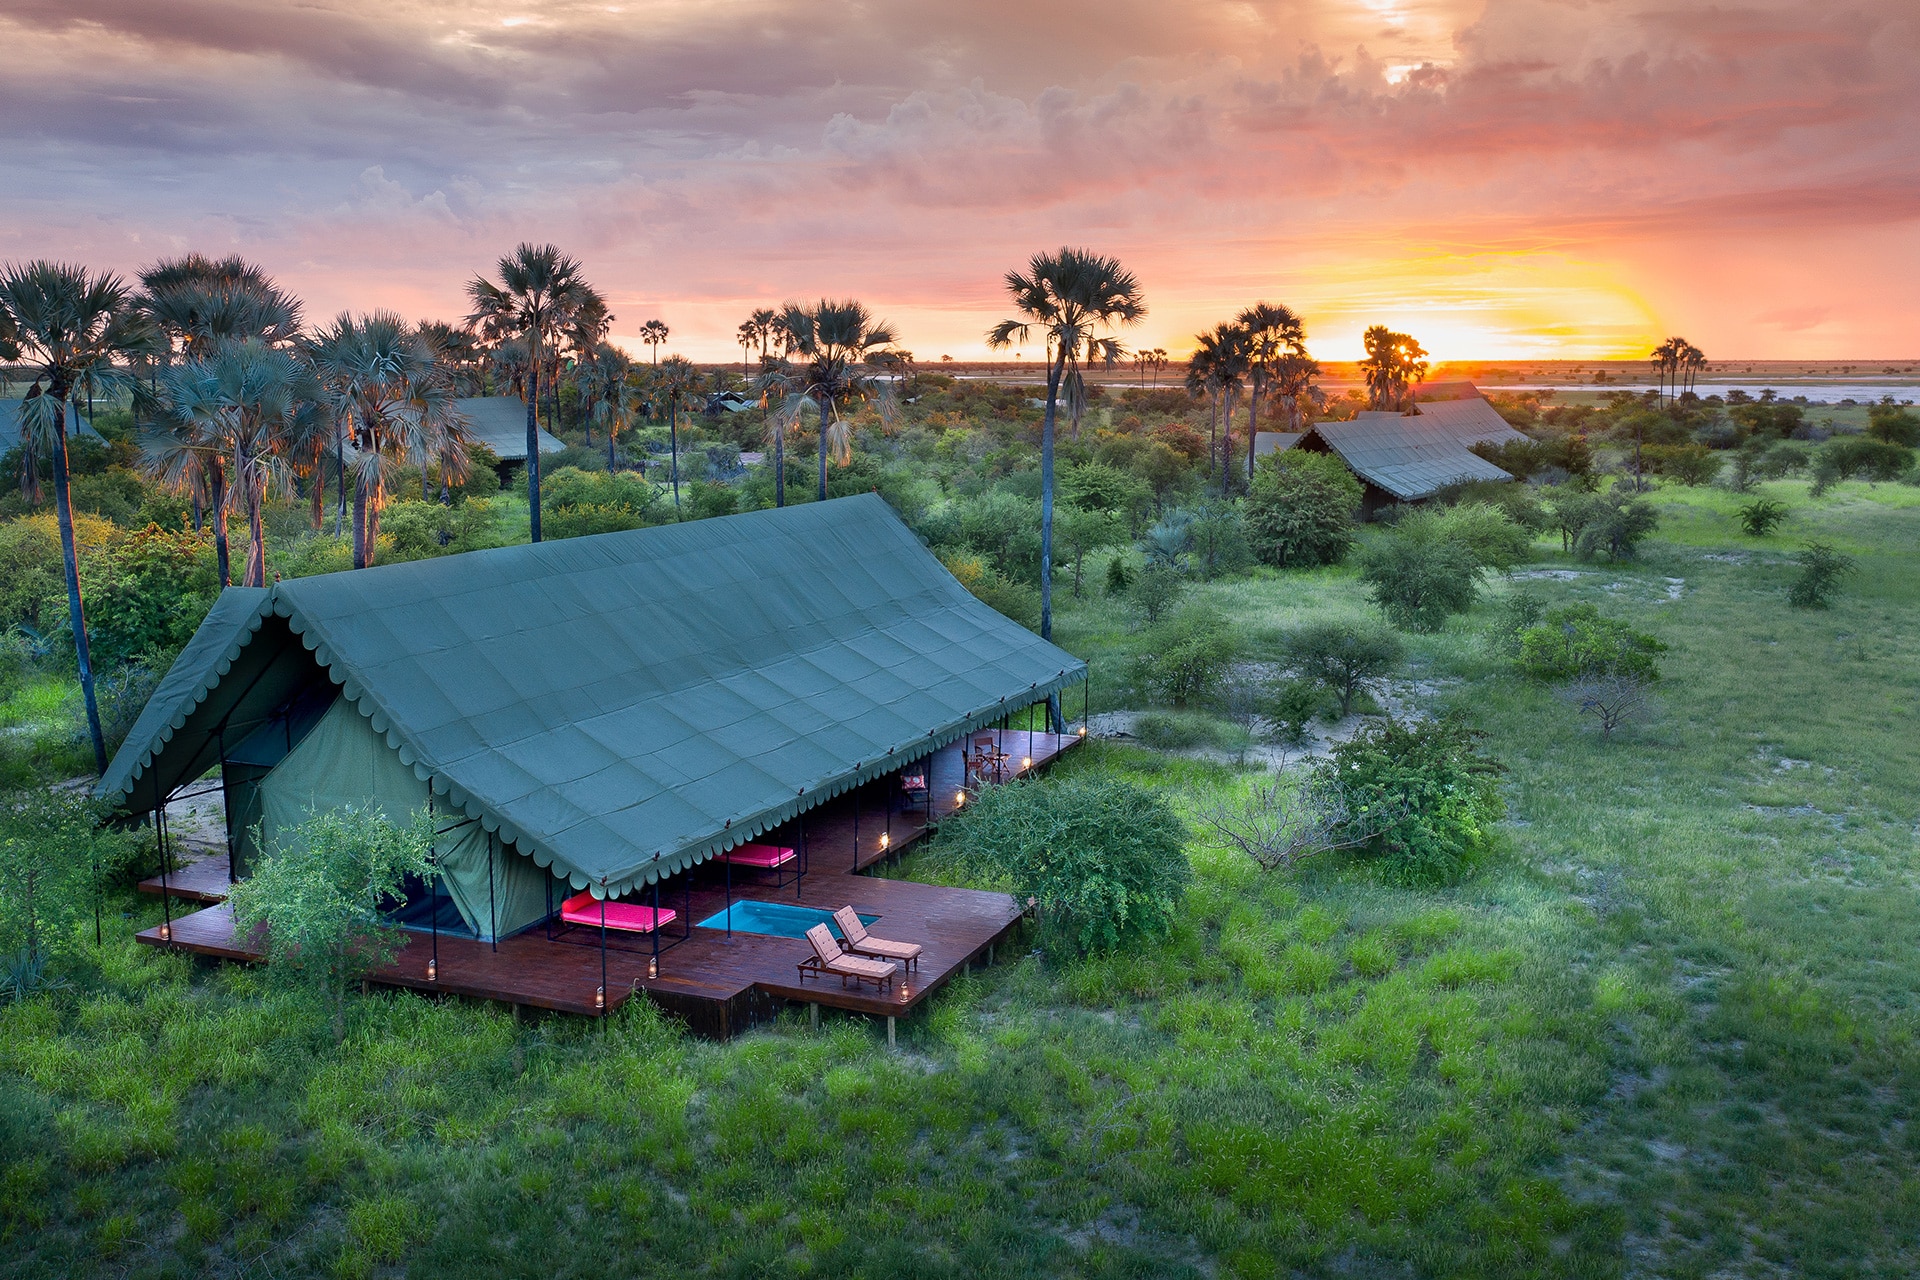 Exterior of the new tents at Jack's Camp - one of the luxury lodges in Africa